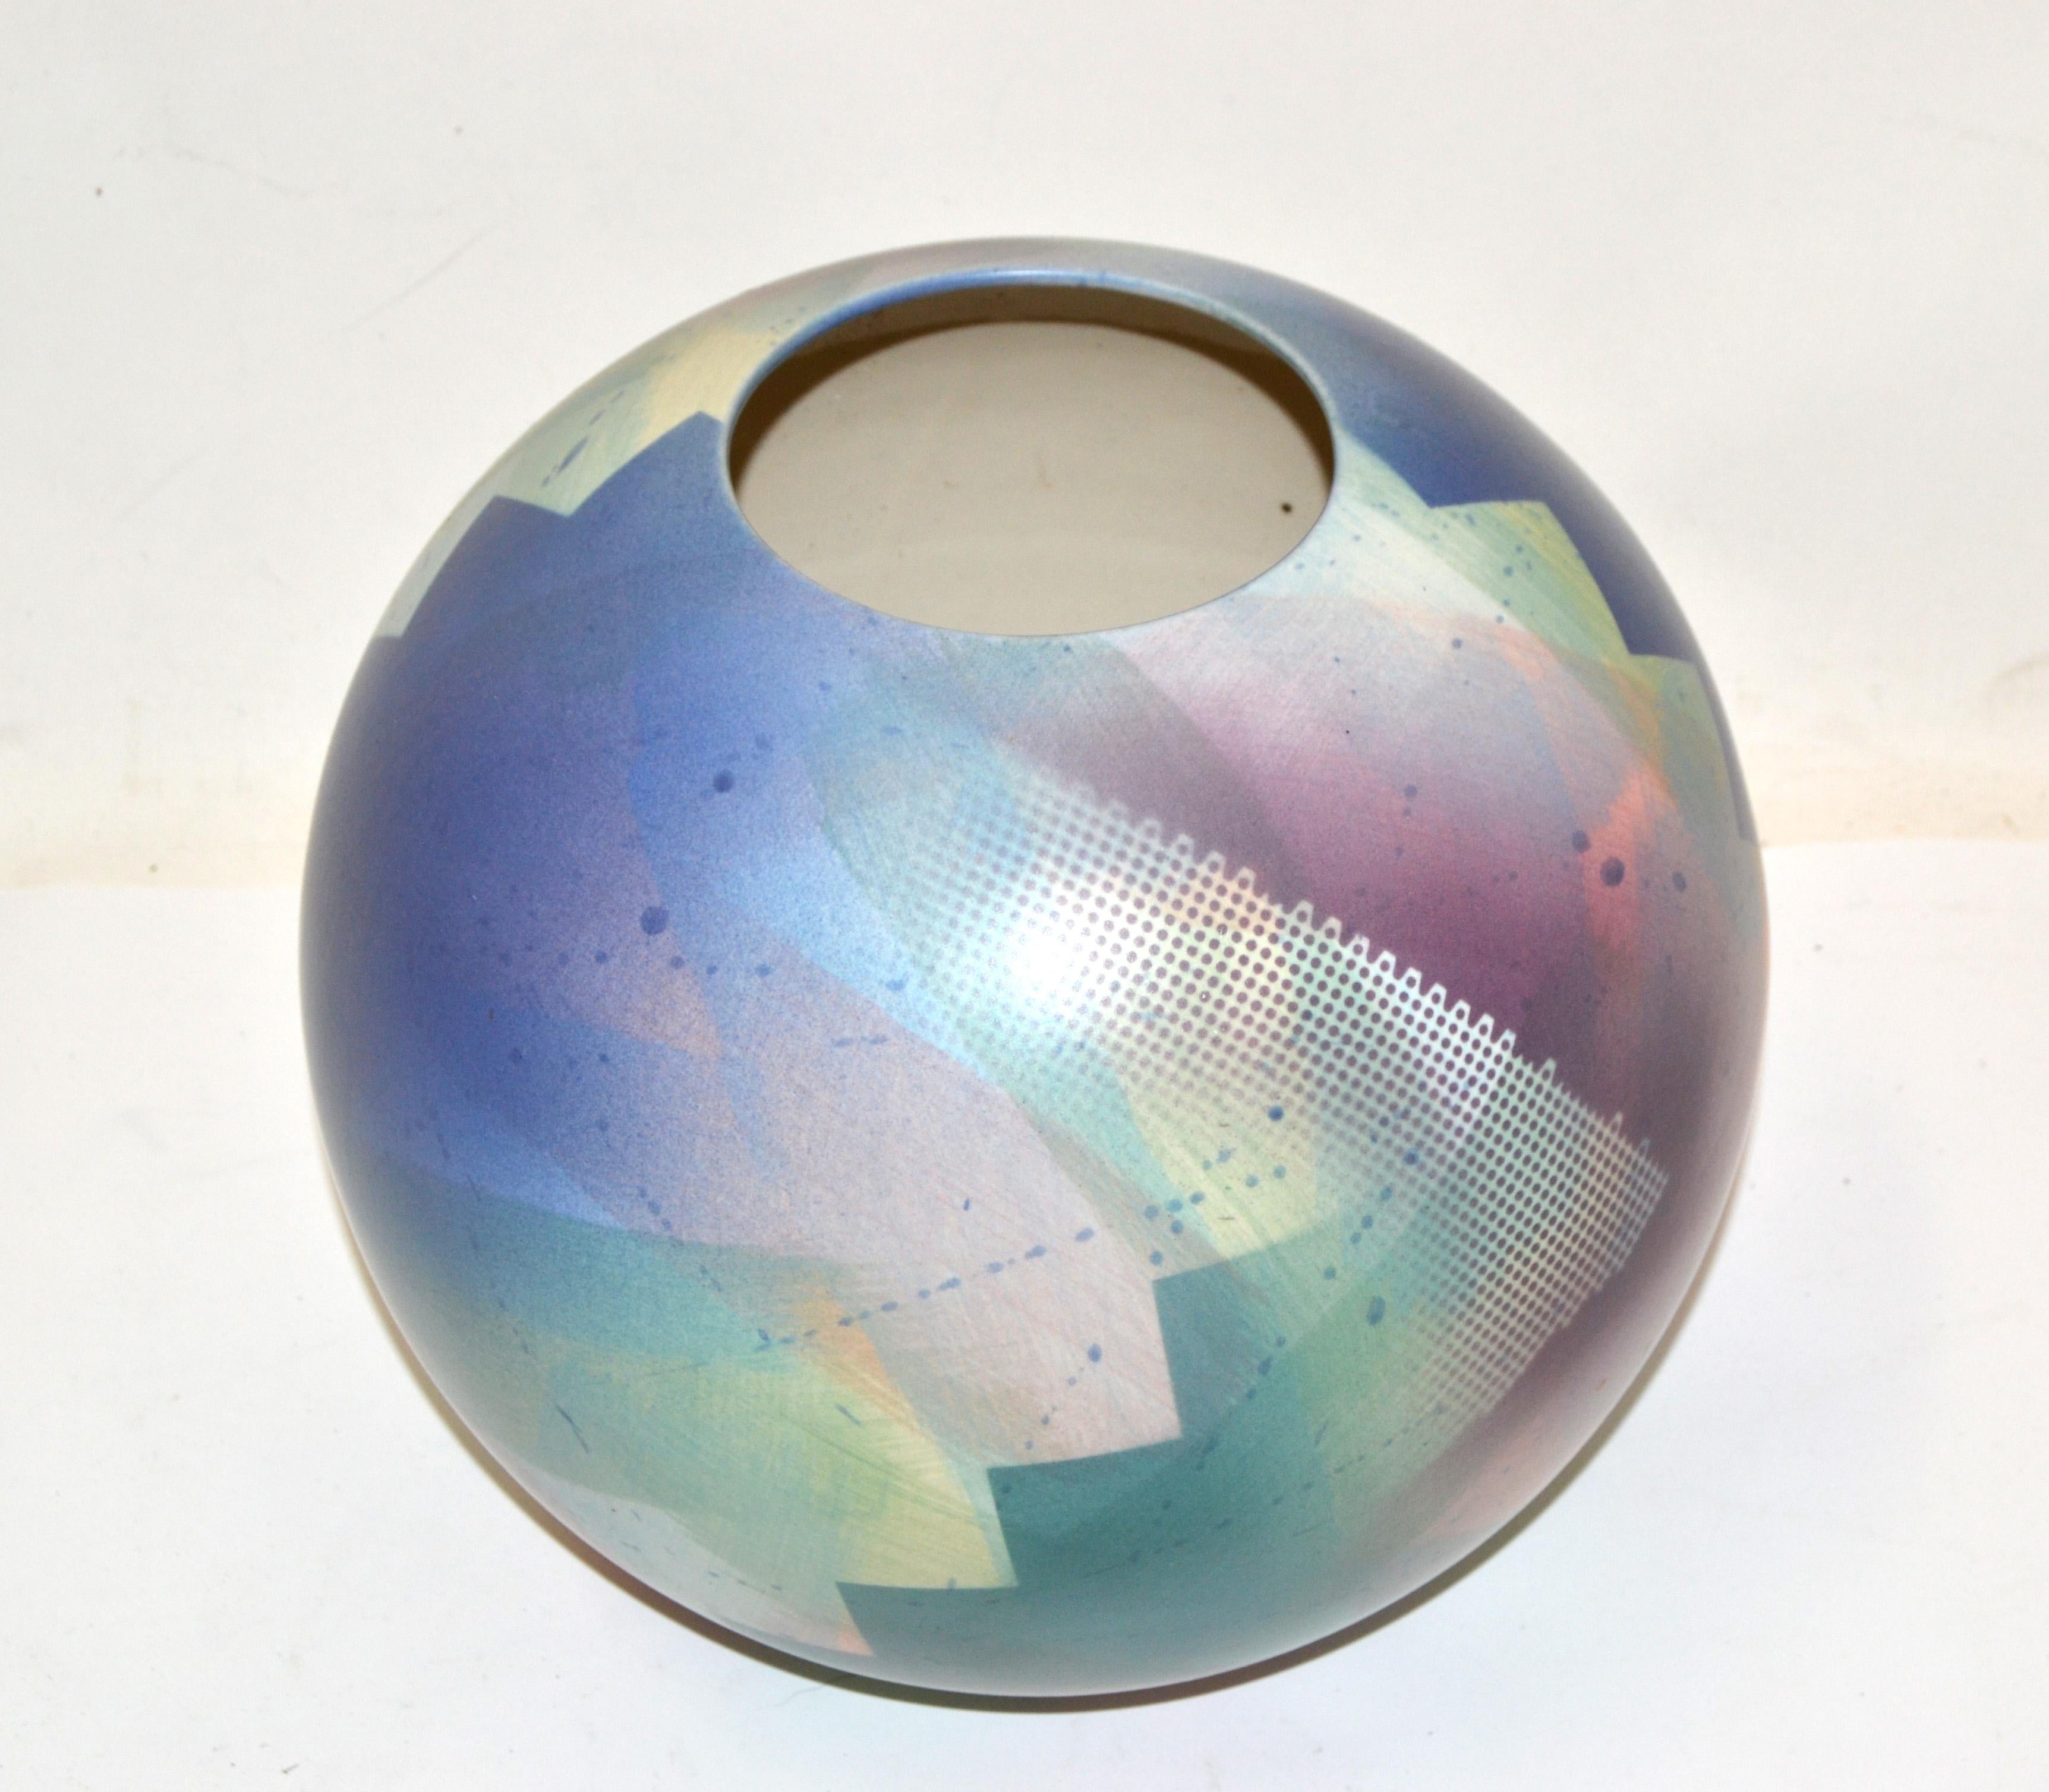 Marked and Numbered John Bergen Studio Canada round Ceramic Vase, Vessel made in the 1980.
Hand-painted and glazed in mellow pastel colors. 
The opening measures 4.75 inches in Diameter.
Marked at the base with foil label and JB V 91.